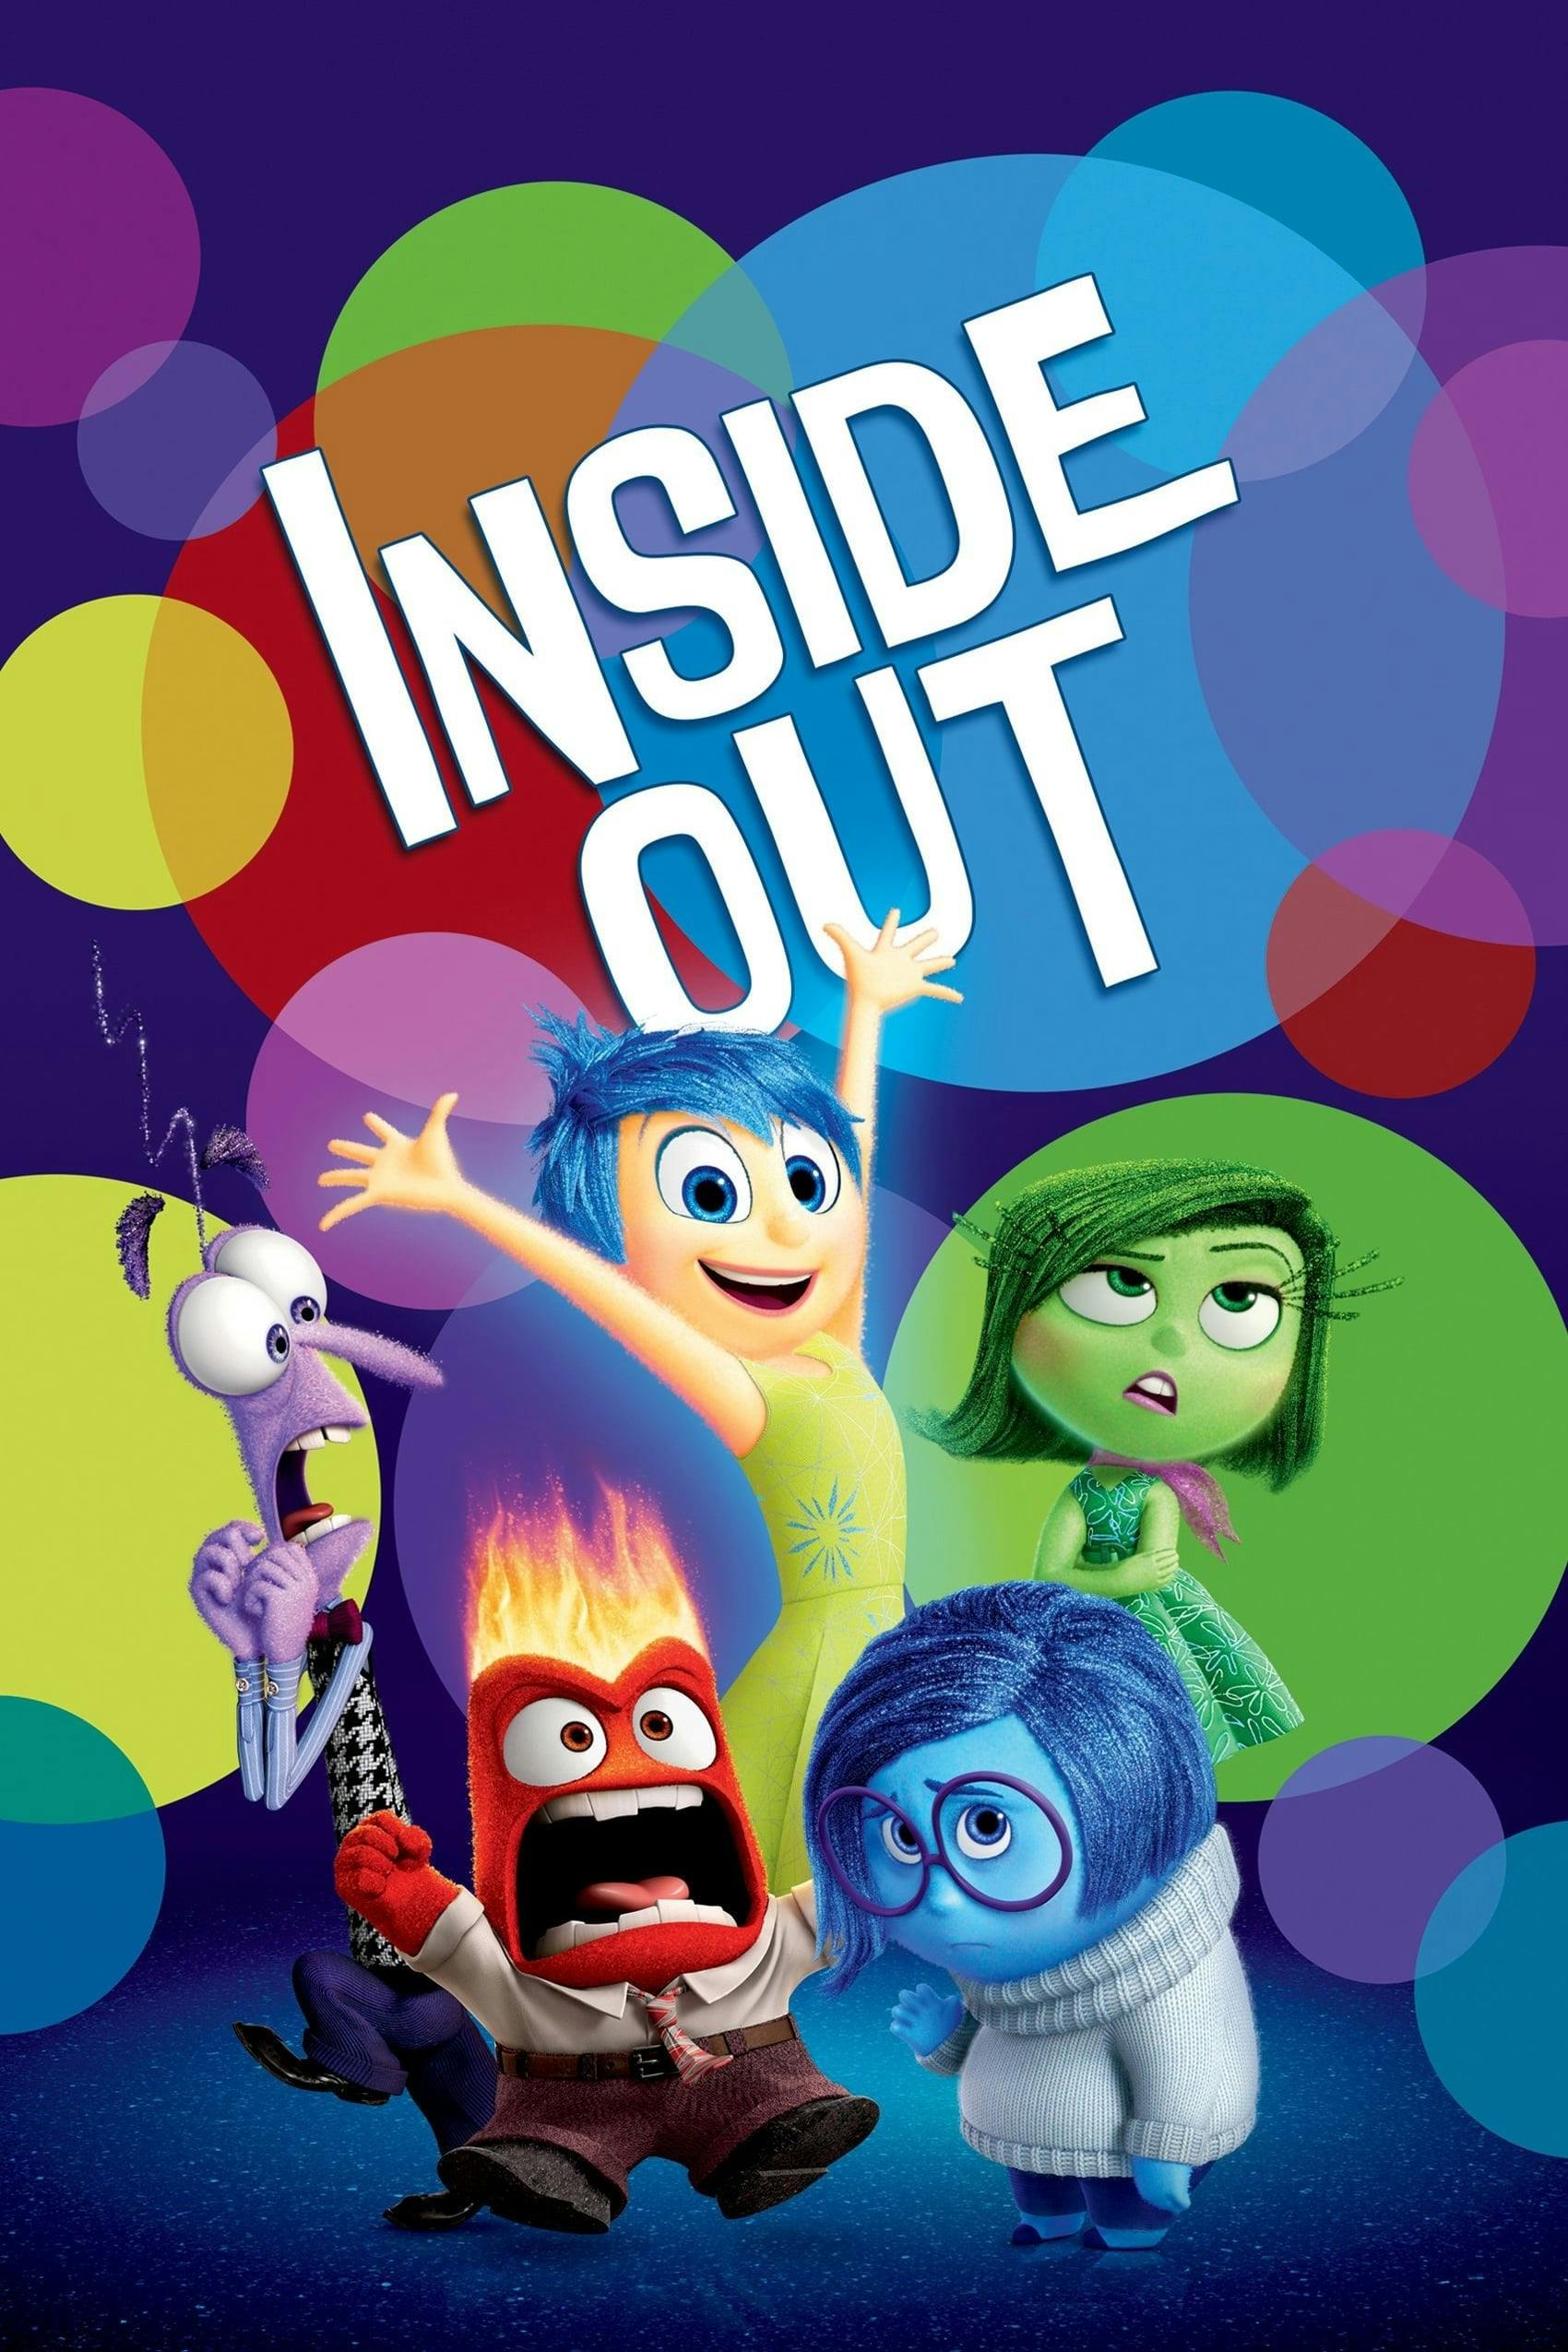 Movie poster of "Inside Out"